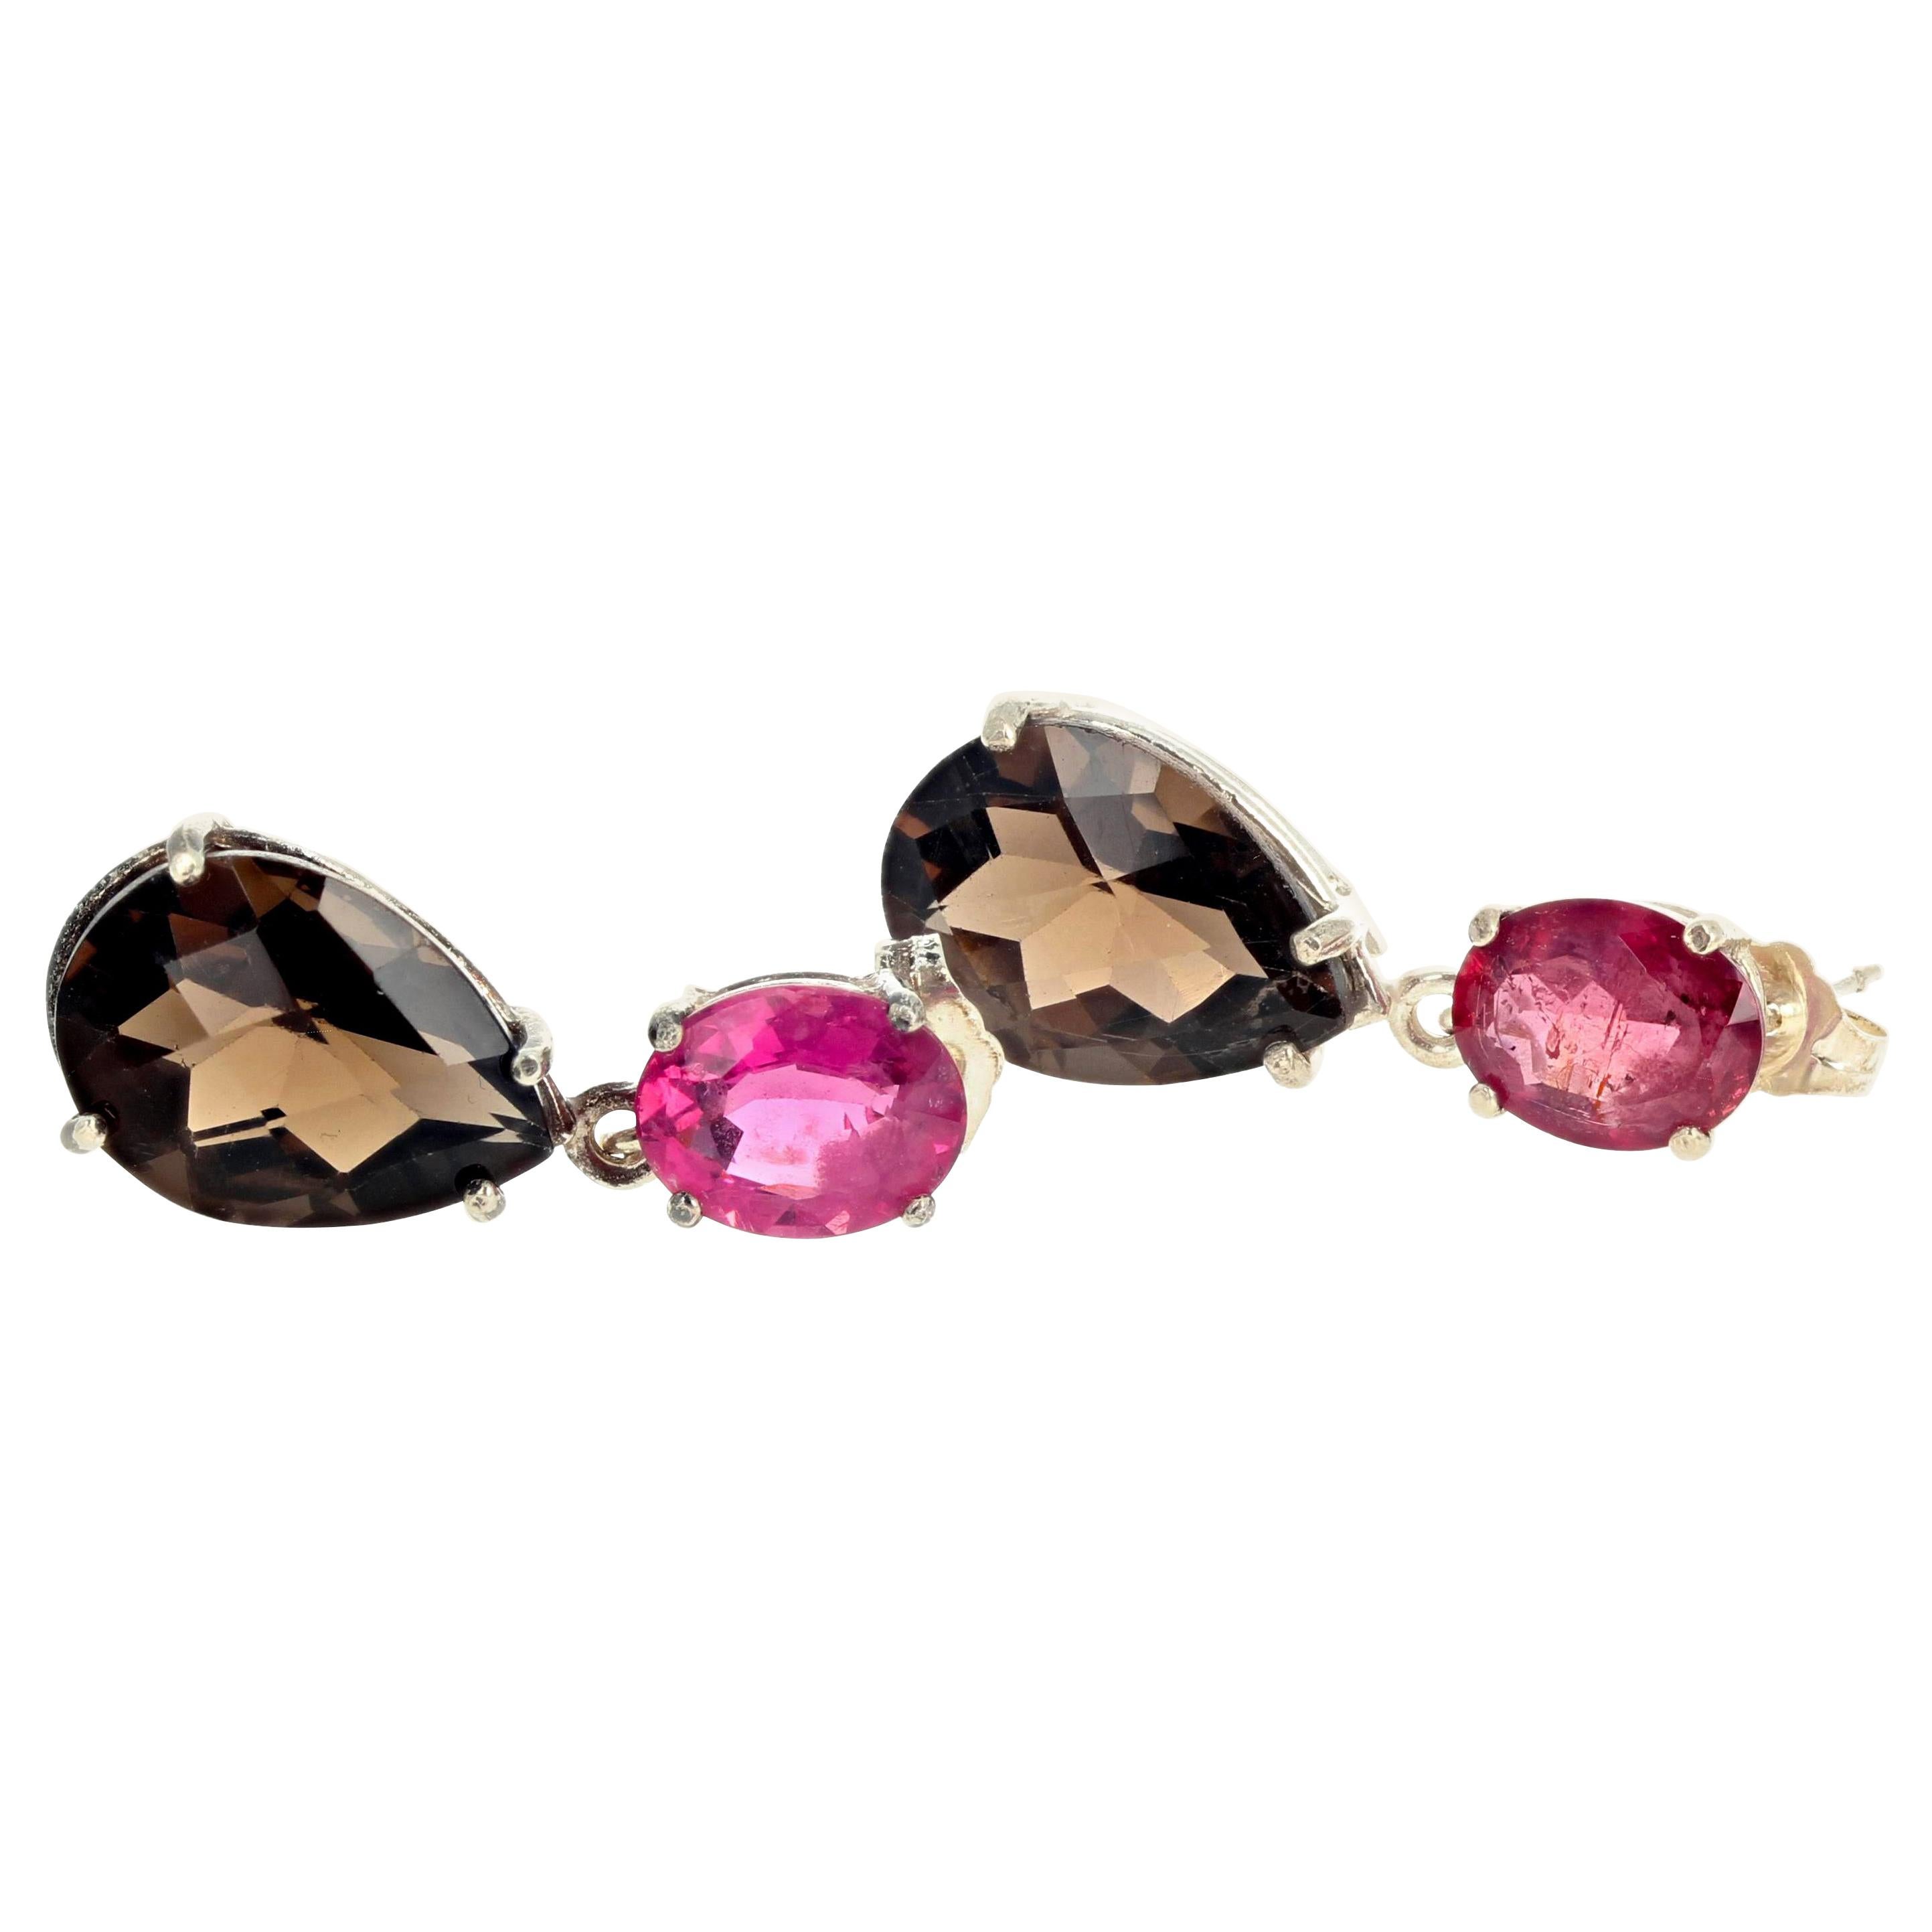 Pink Tourmaline and Smoky Quartz Sterling Silver Earrings